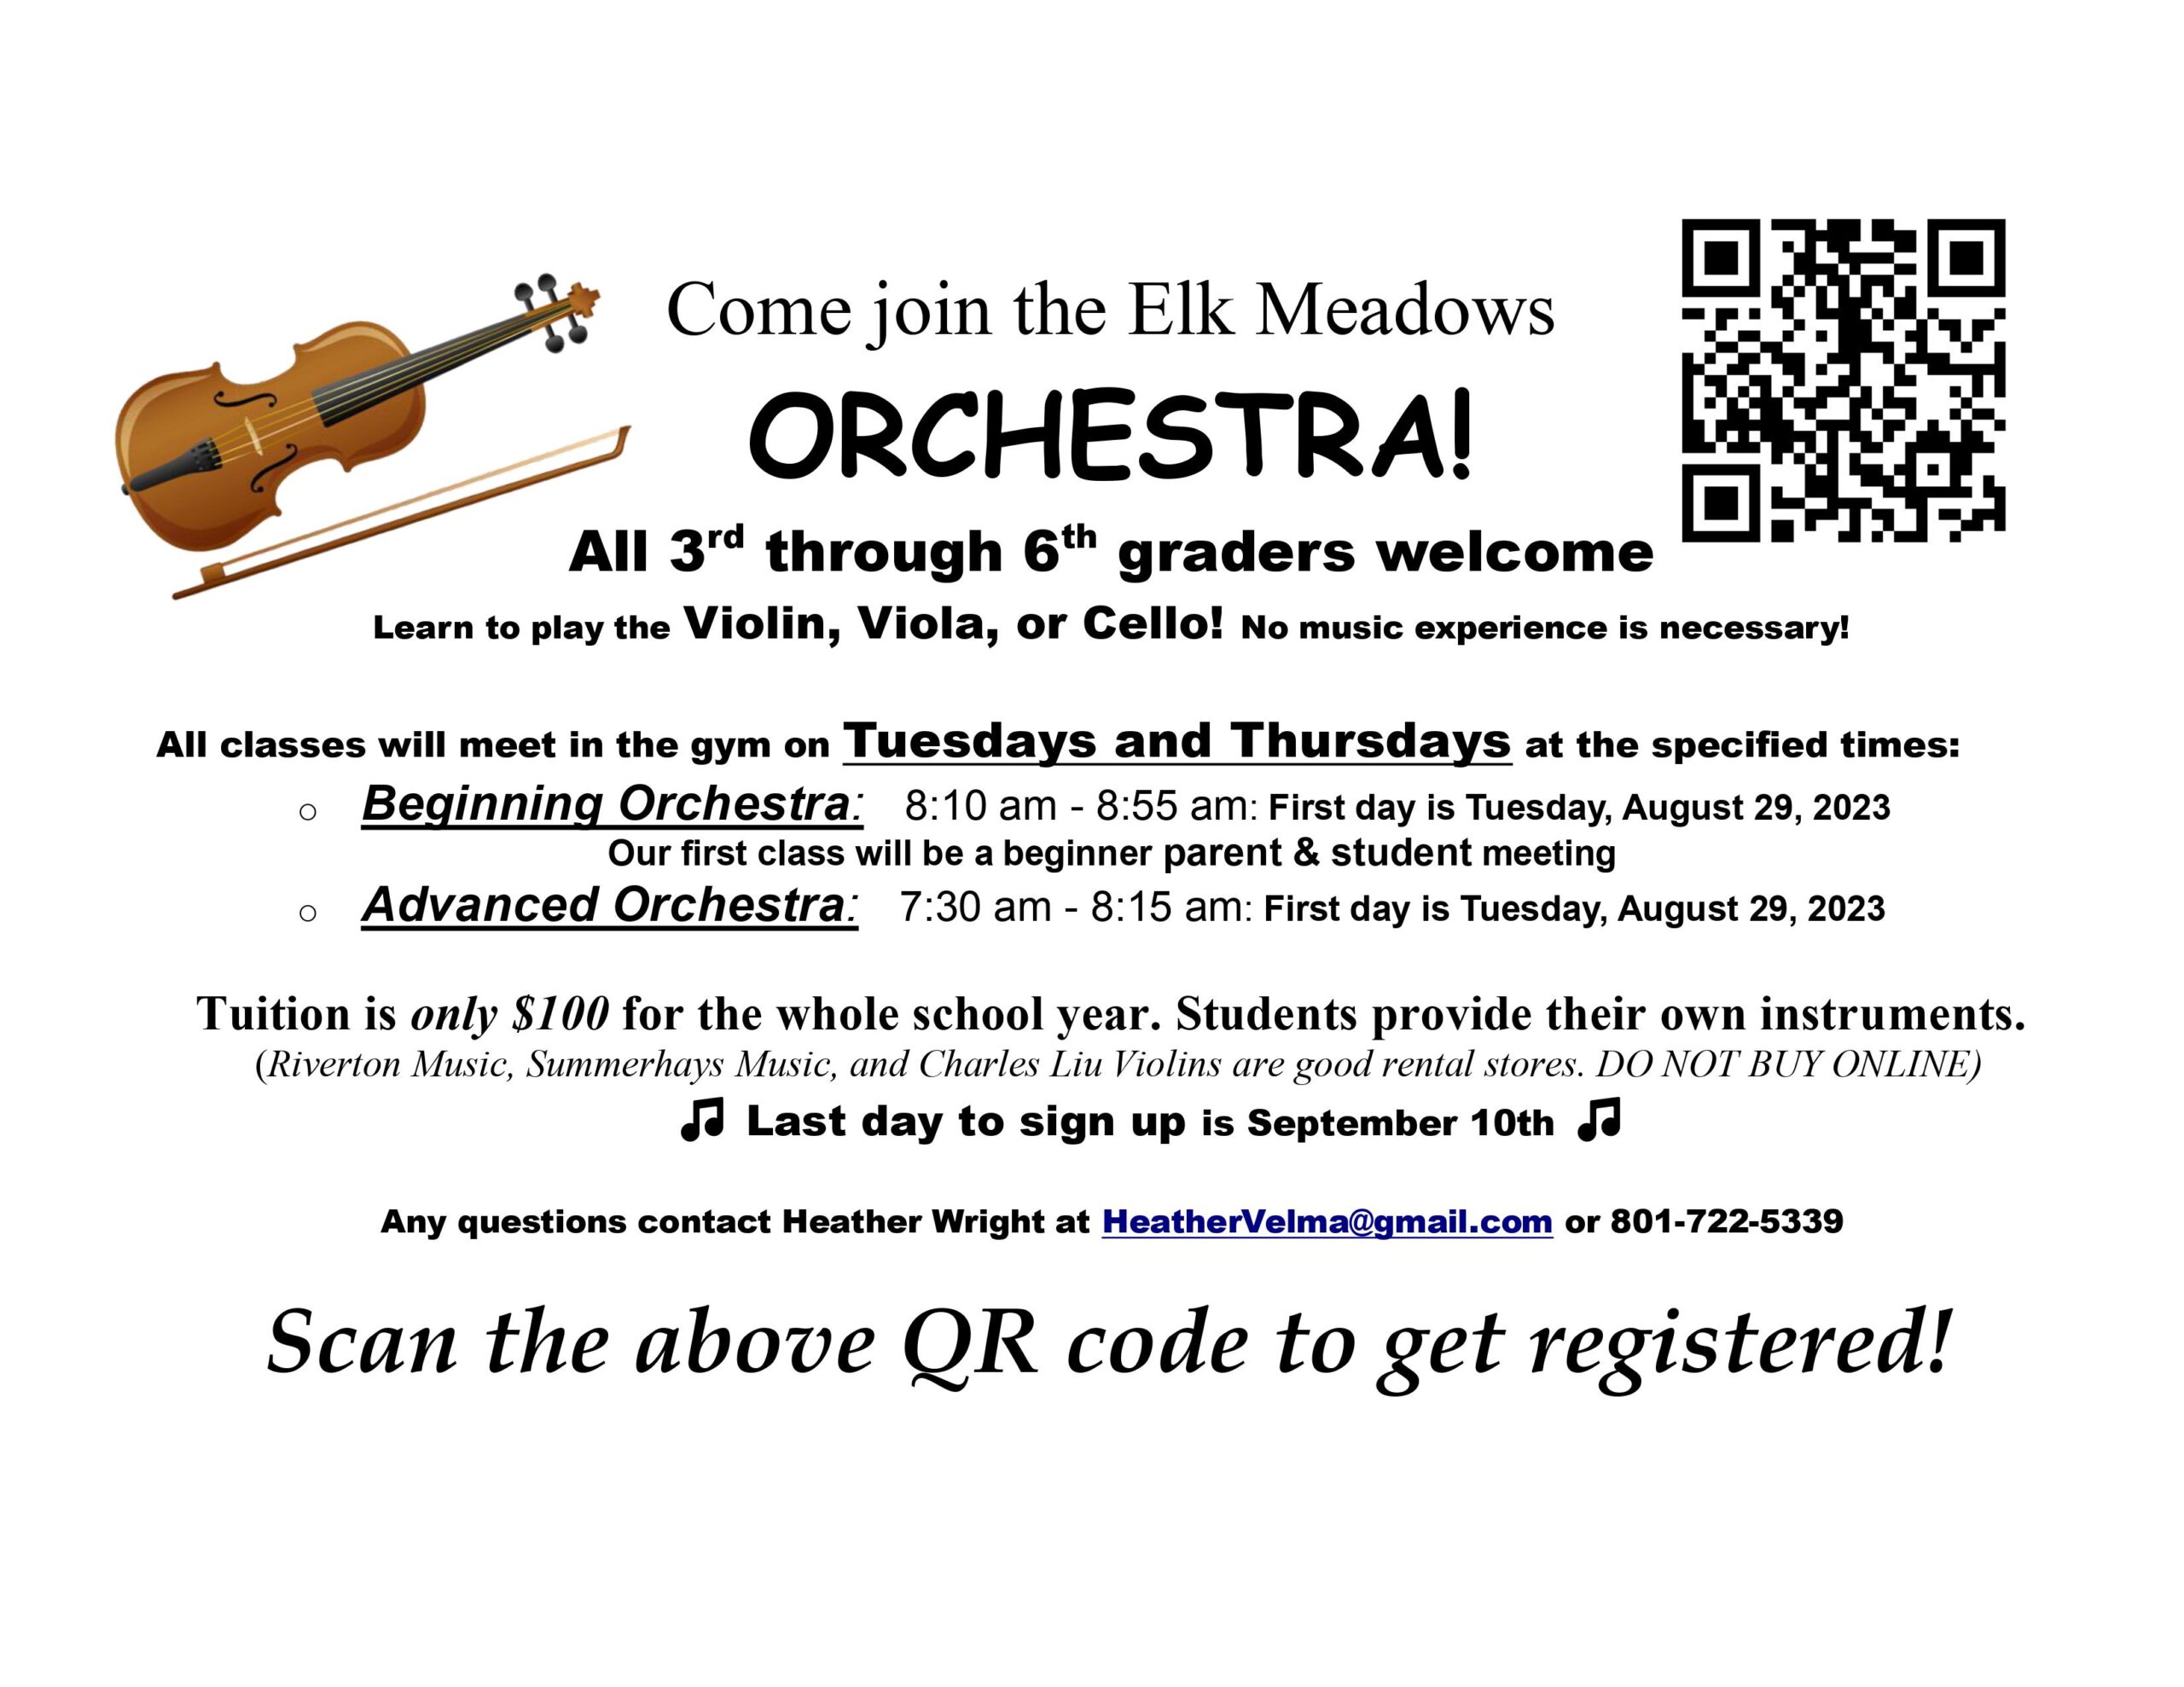 Orchestra Flyer 